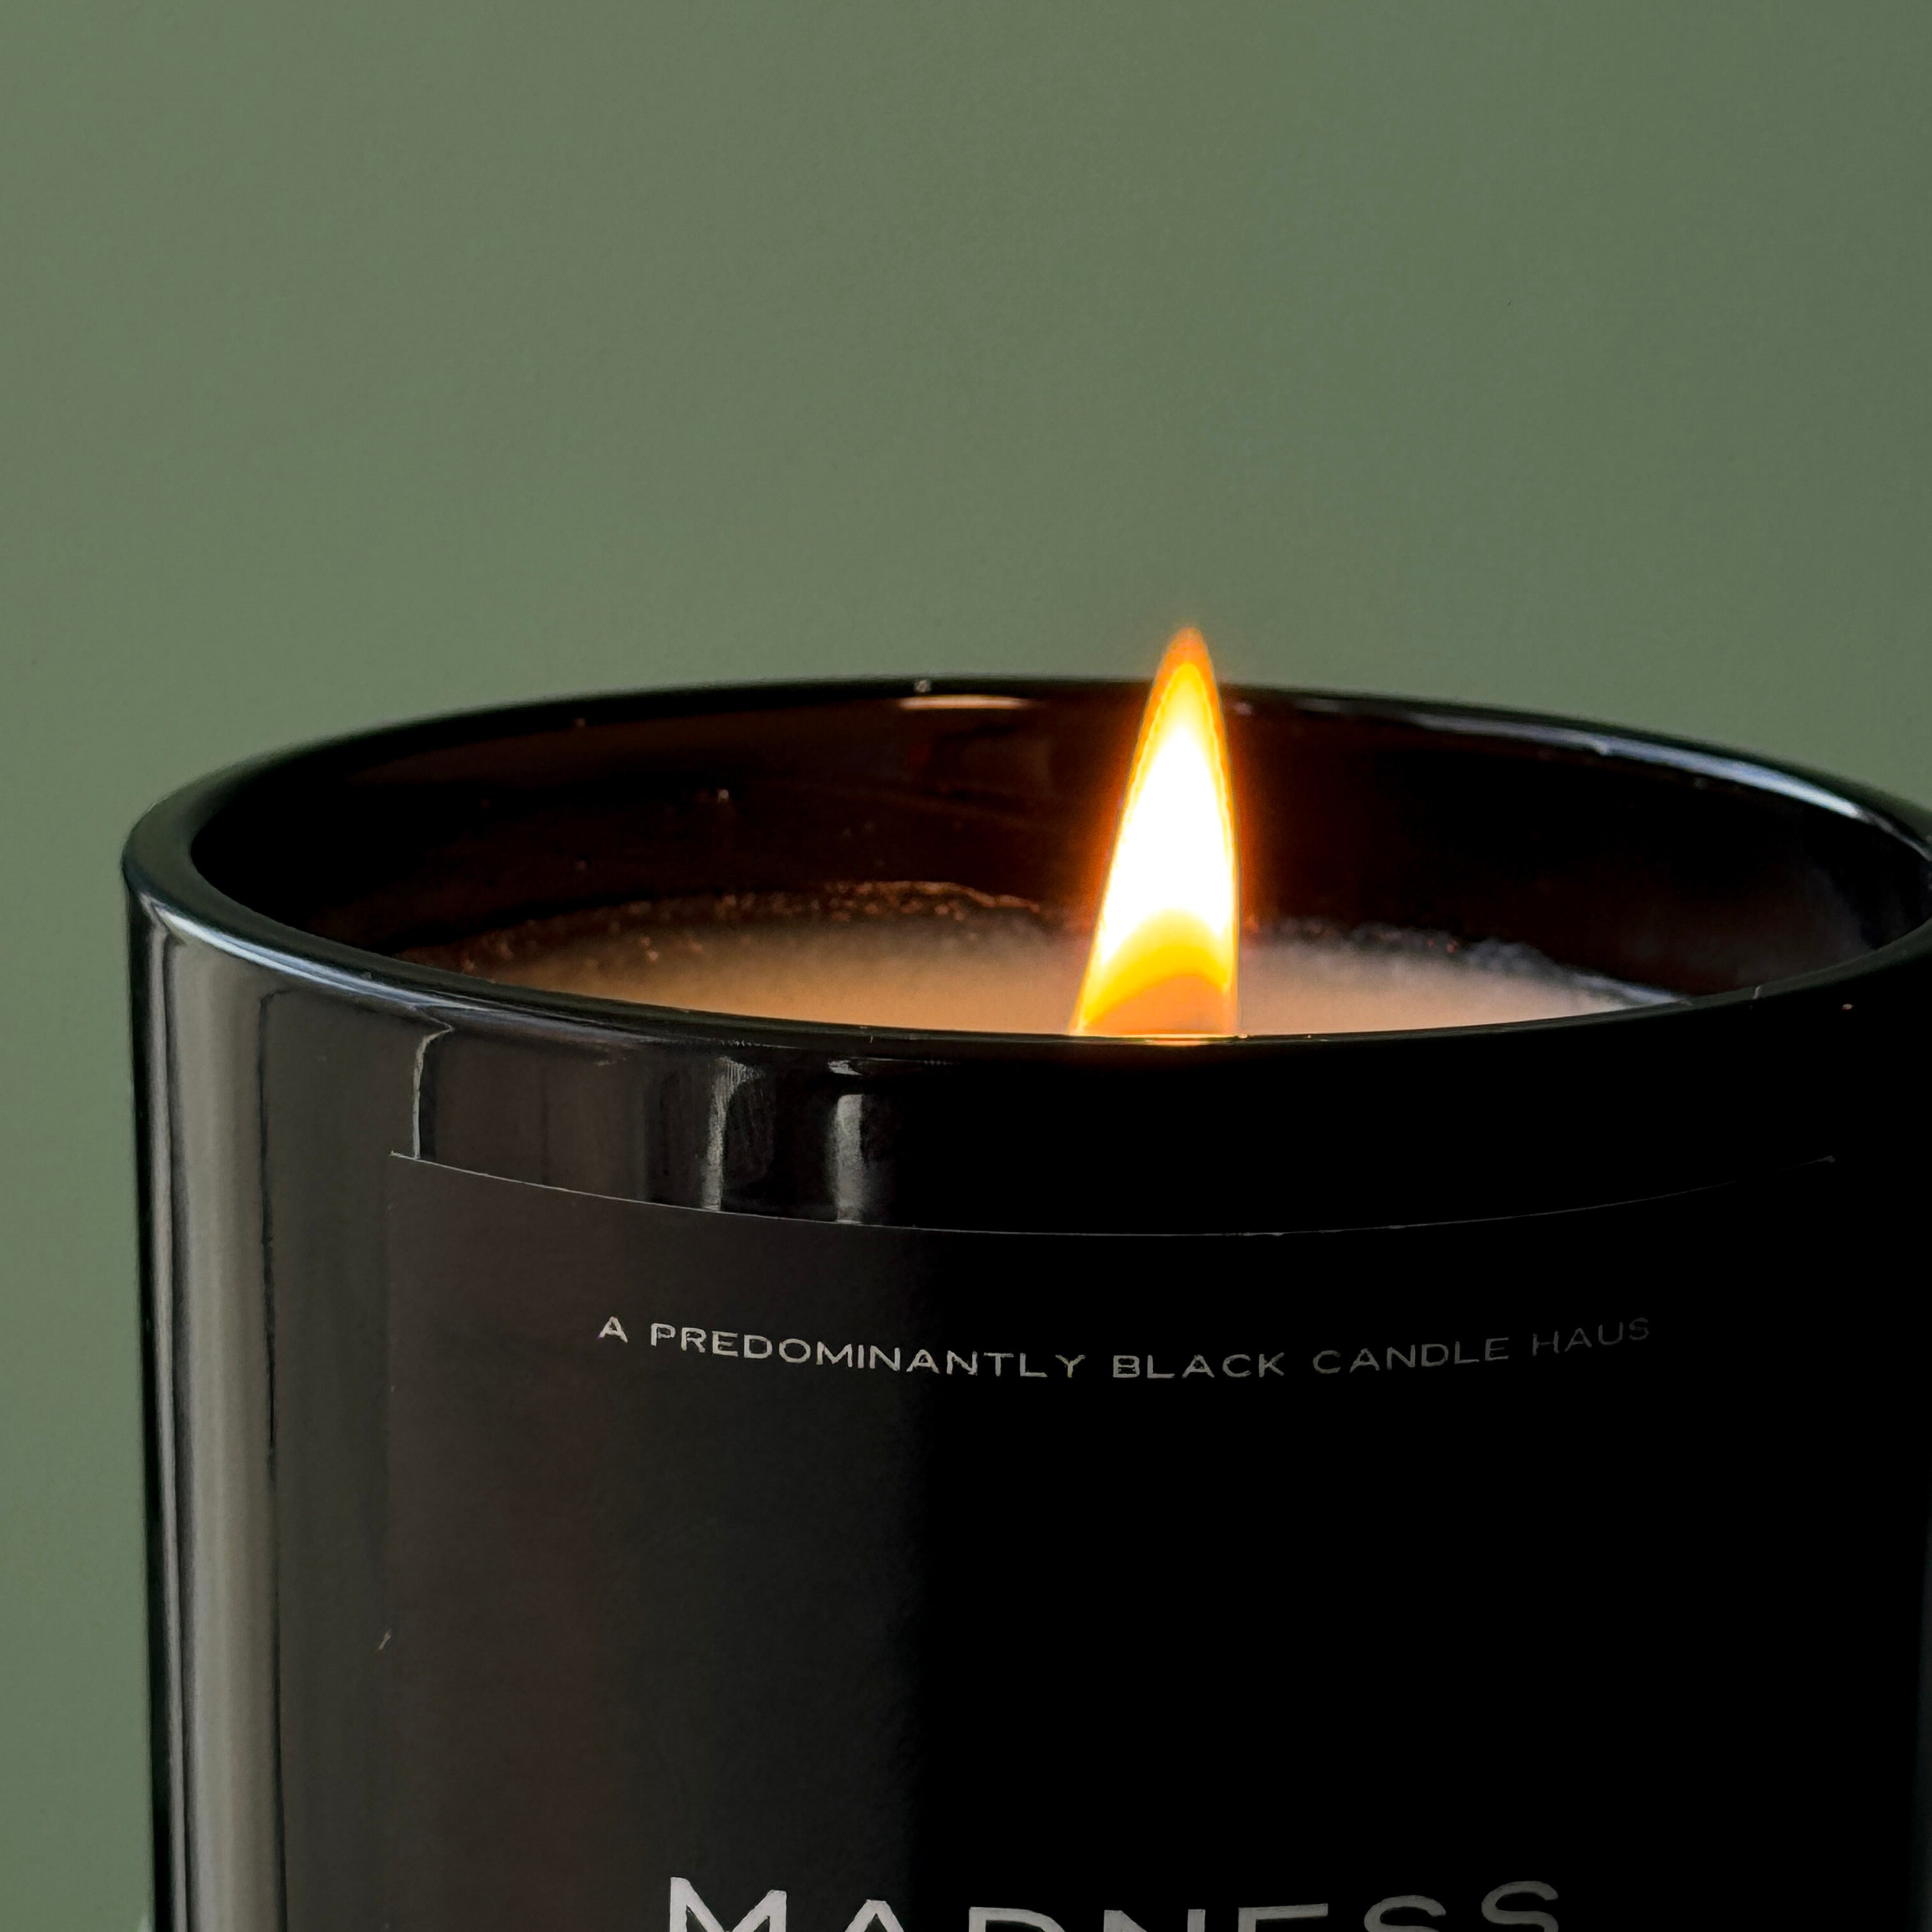 A glowing candle flame atop a Predominantly Black A MADNESS CANDLE with a description of its various tropical paradise scented notes.